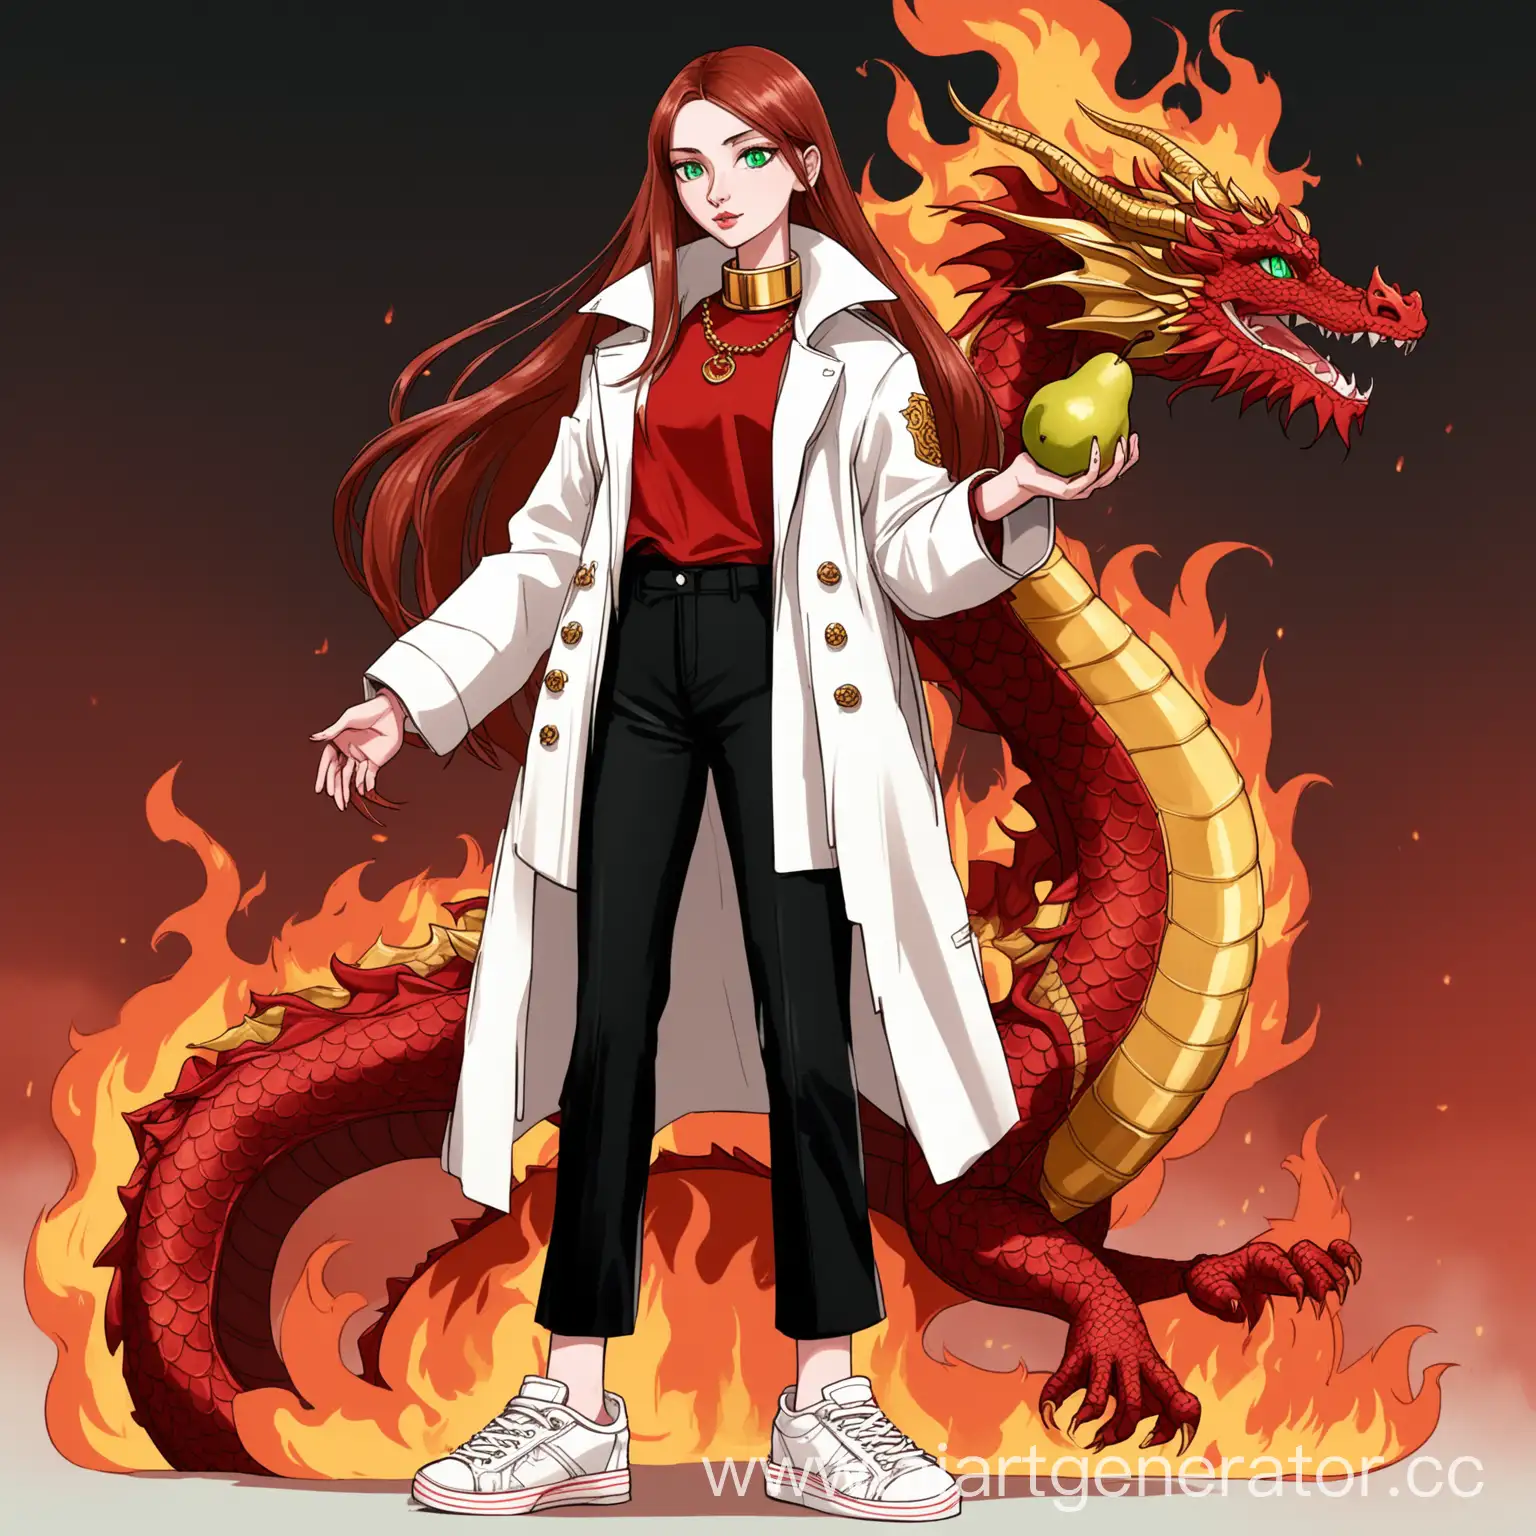 Tall-Girl-with-Emerald-Eyes-and-DragonPrinted-Coat-Holding-Fire-in-Her-Hands